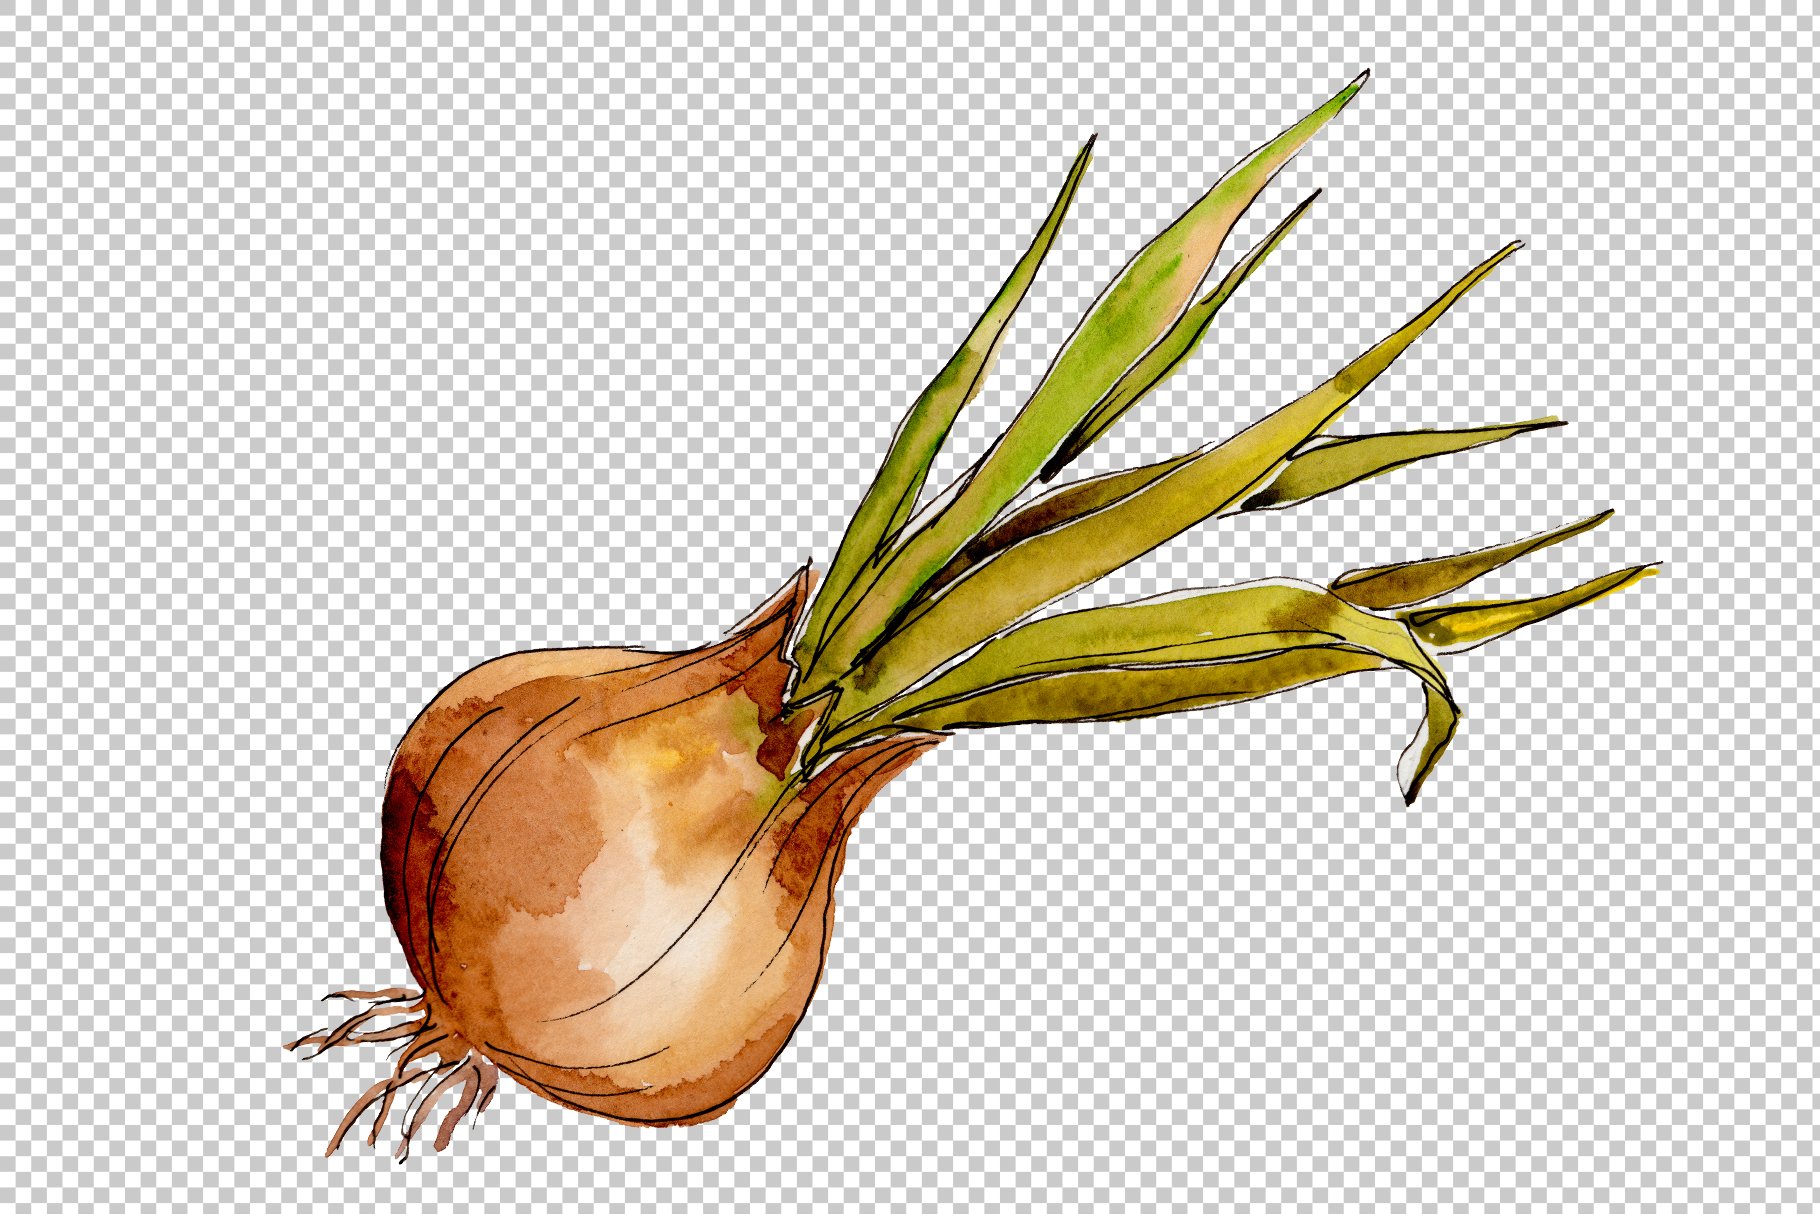 Big onion with green leaves.